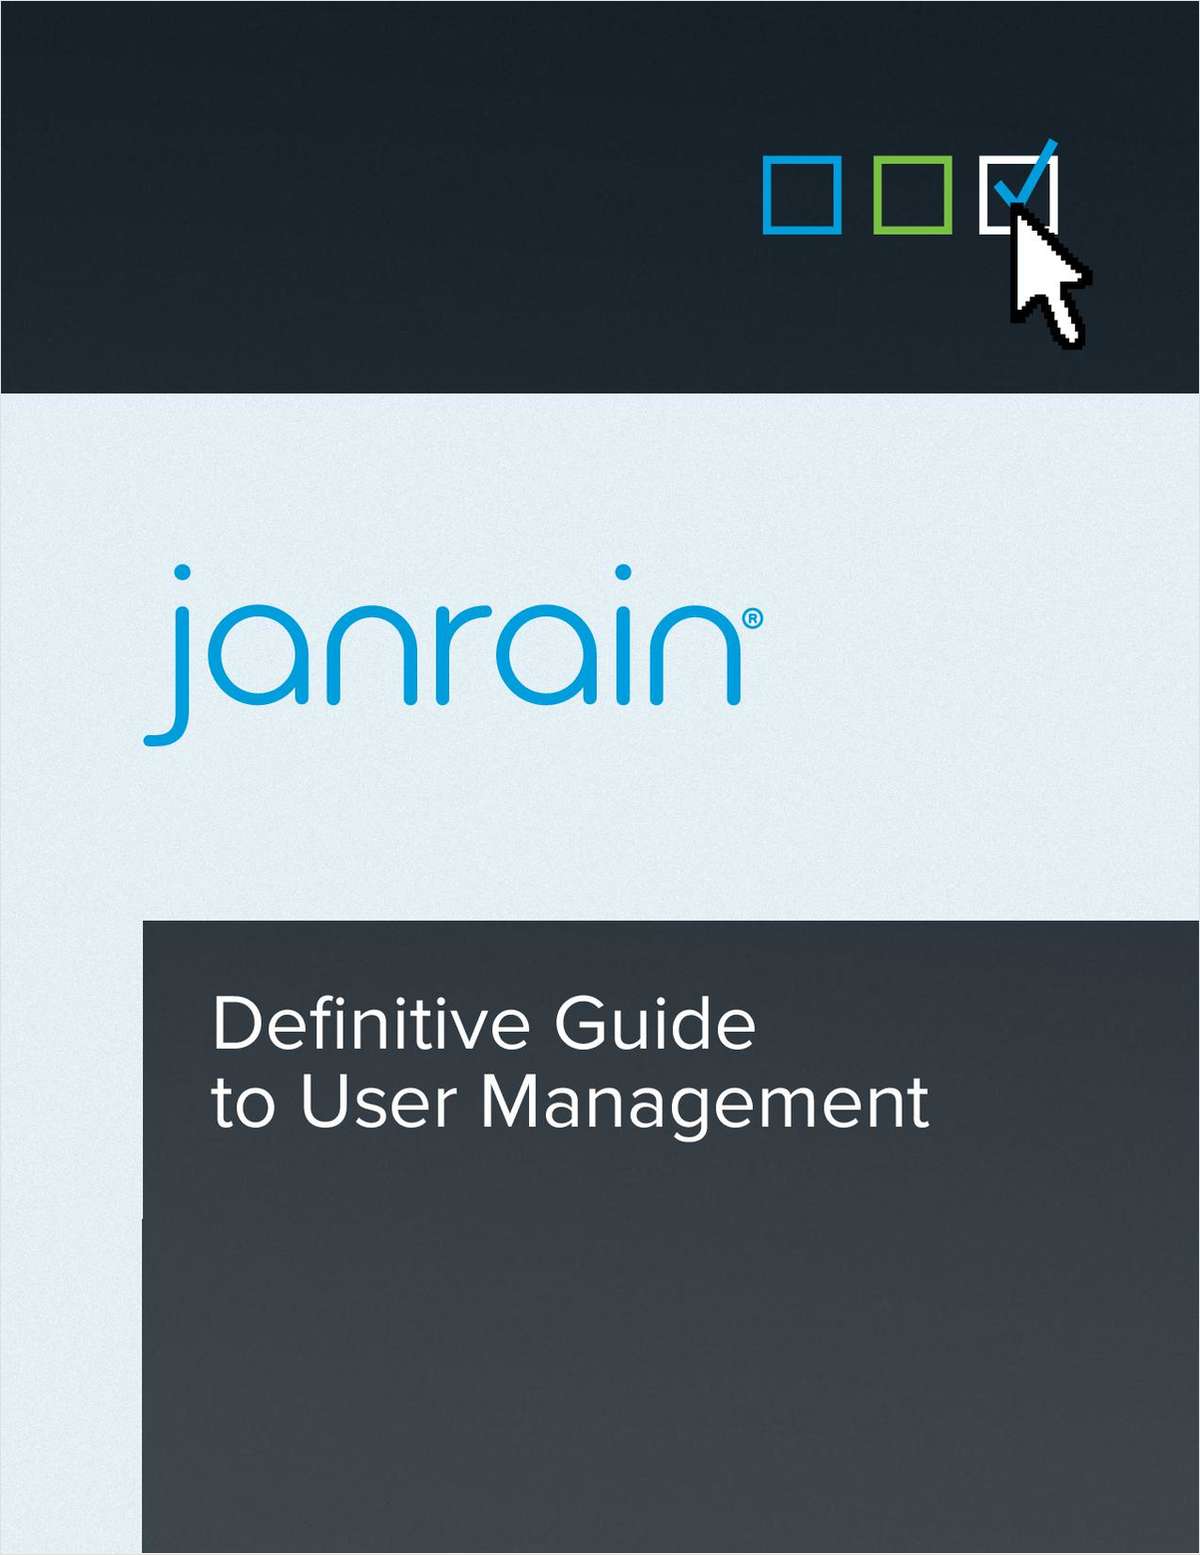 The Definitive Guide to User Management